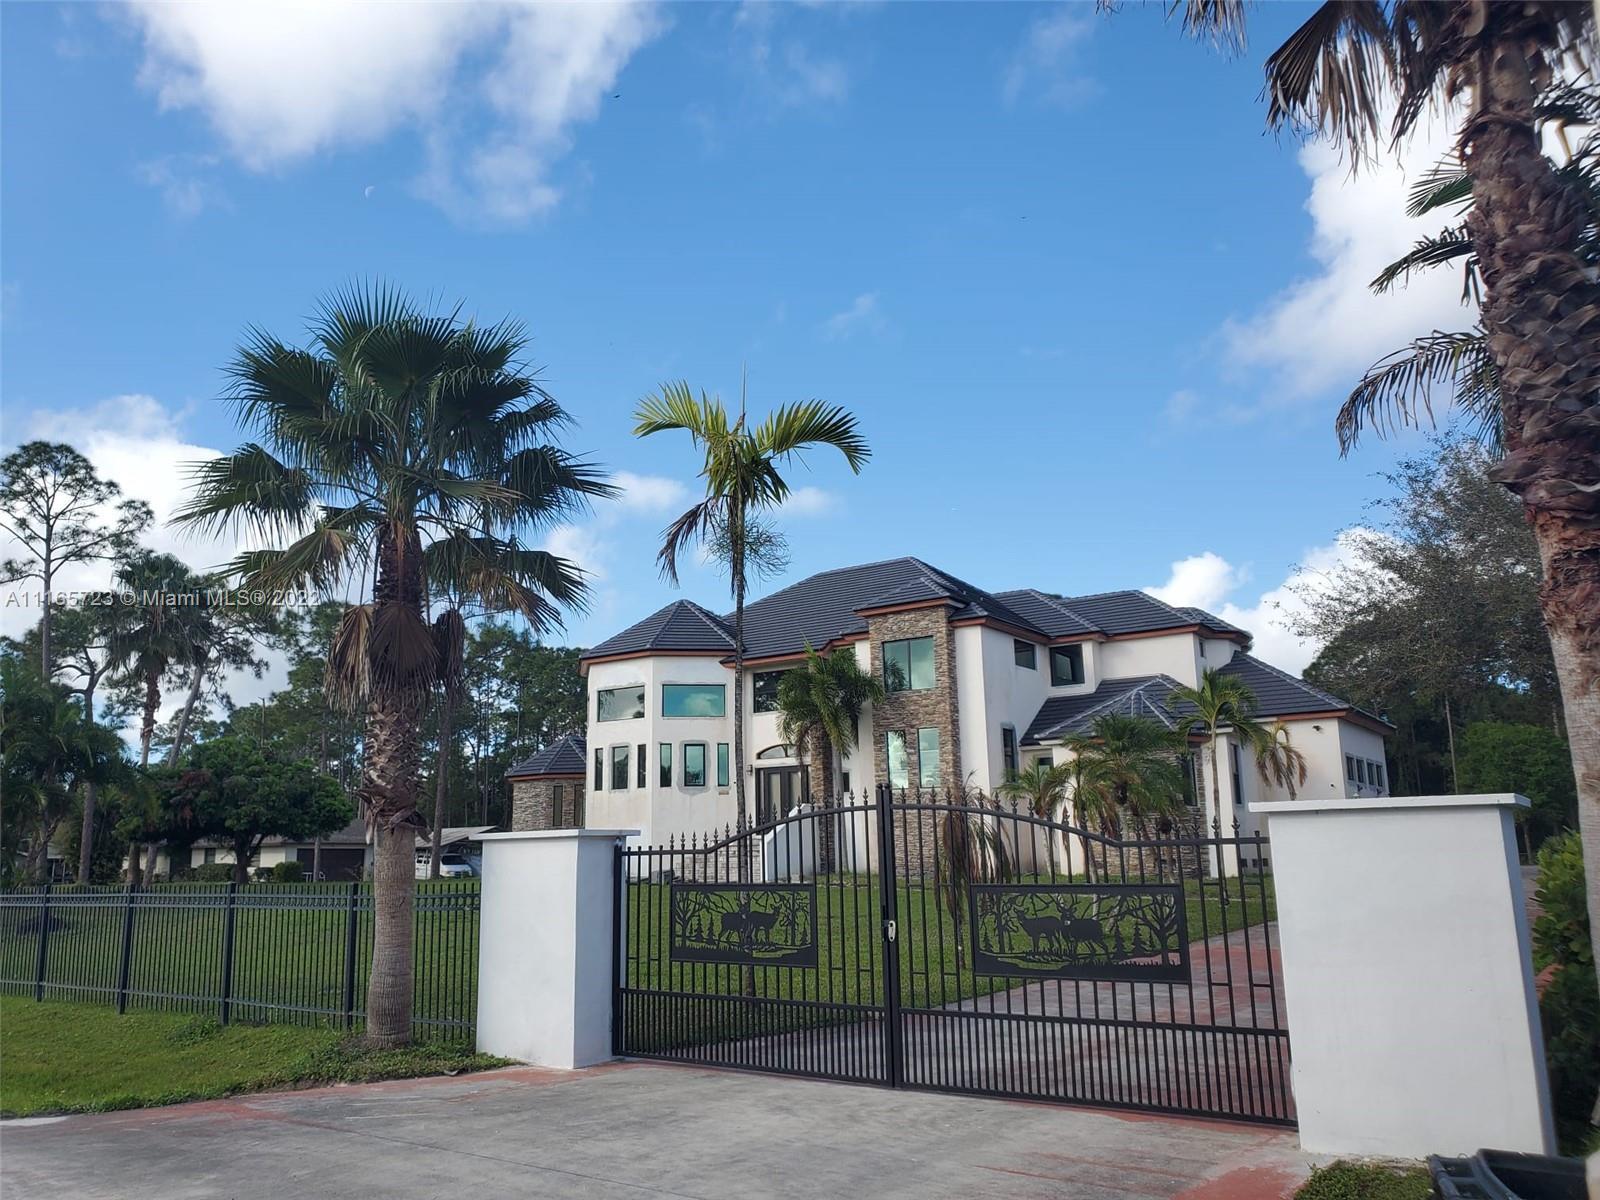 Stunning Home in Jupiter Farms. This extensively renovated, 5300 sq. ft., light-filled modern home, 